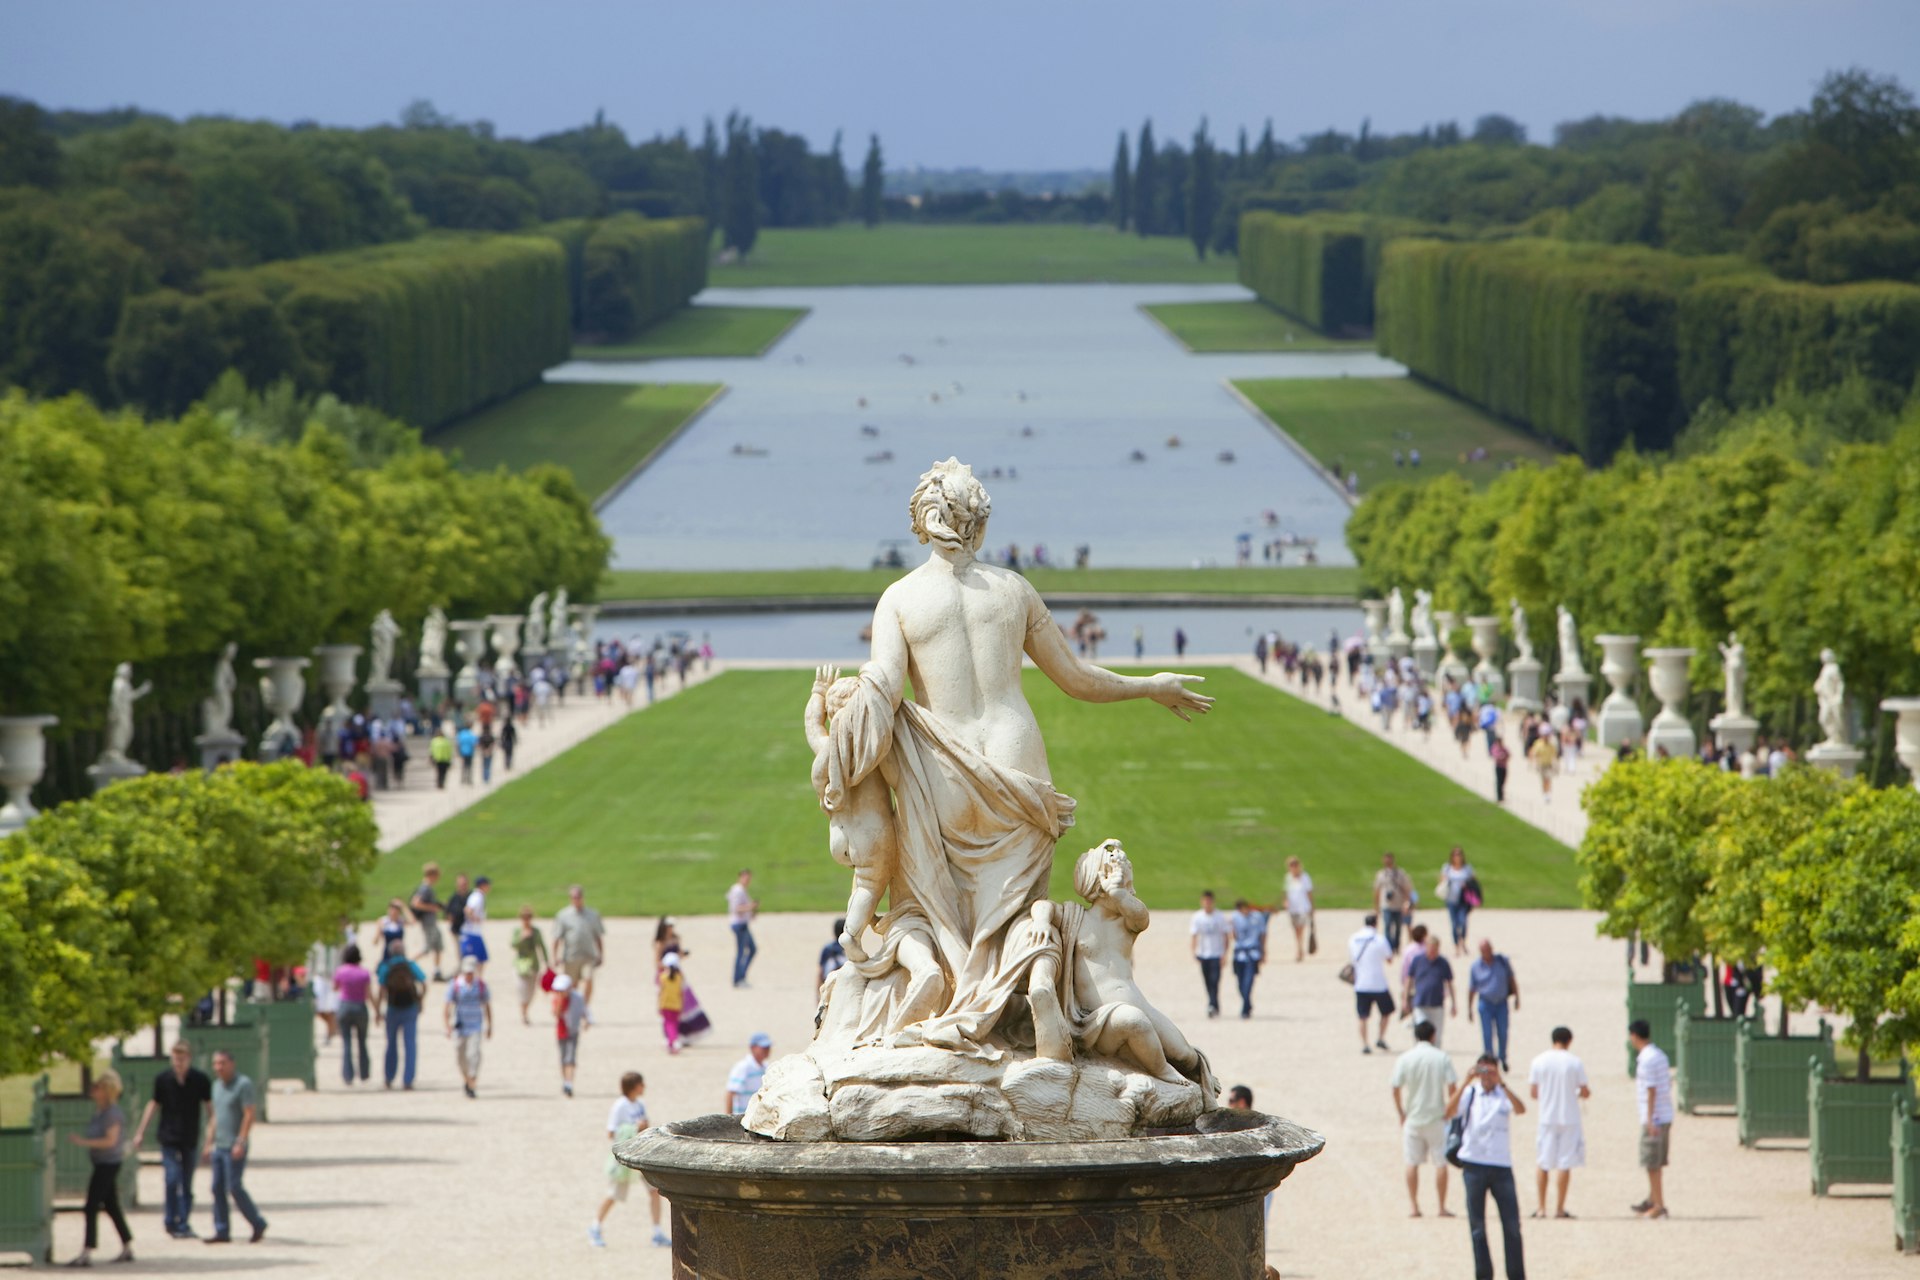 A rear view of a statue and crowds in the distance in the gardens of Versailles Palace, Versailles, France